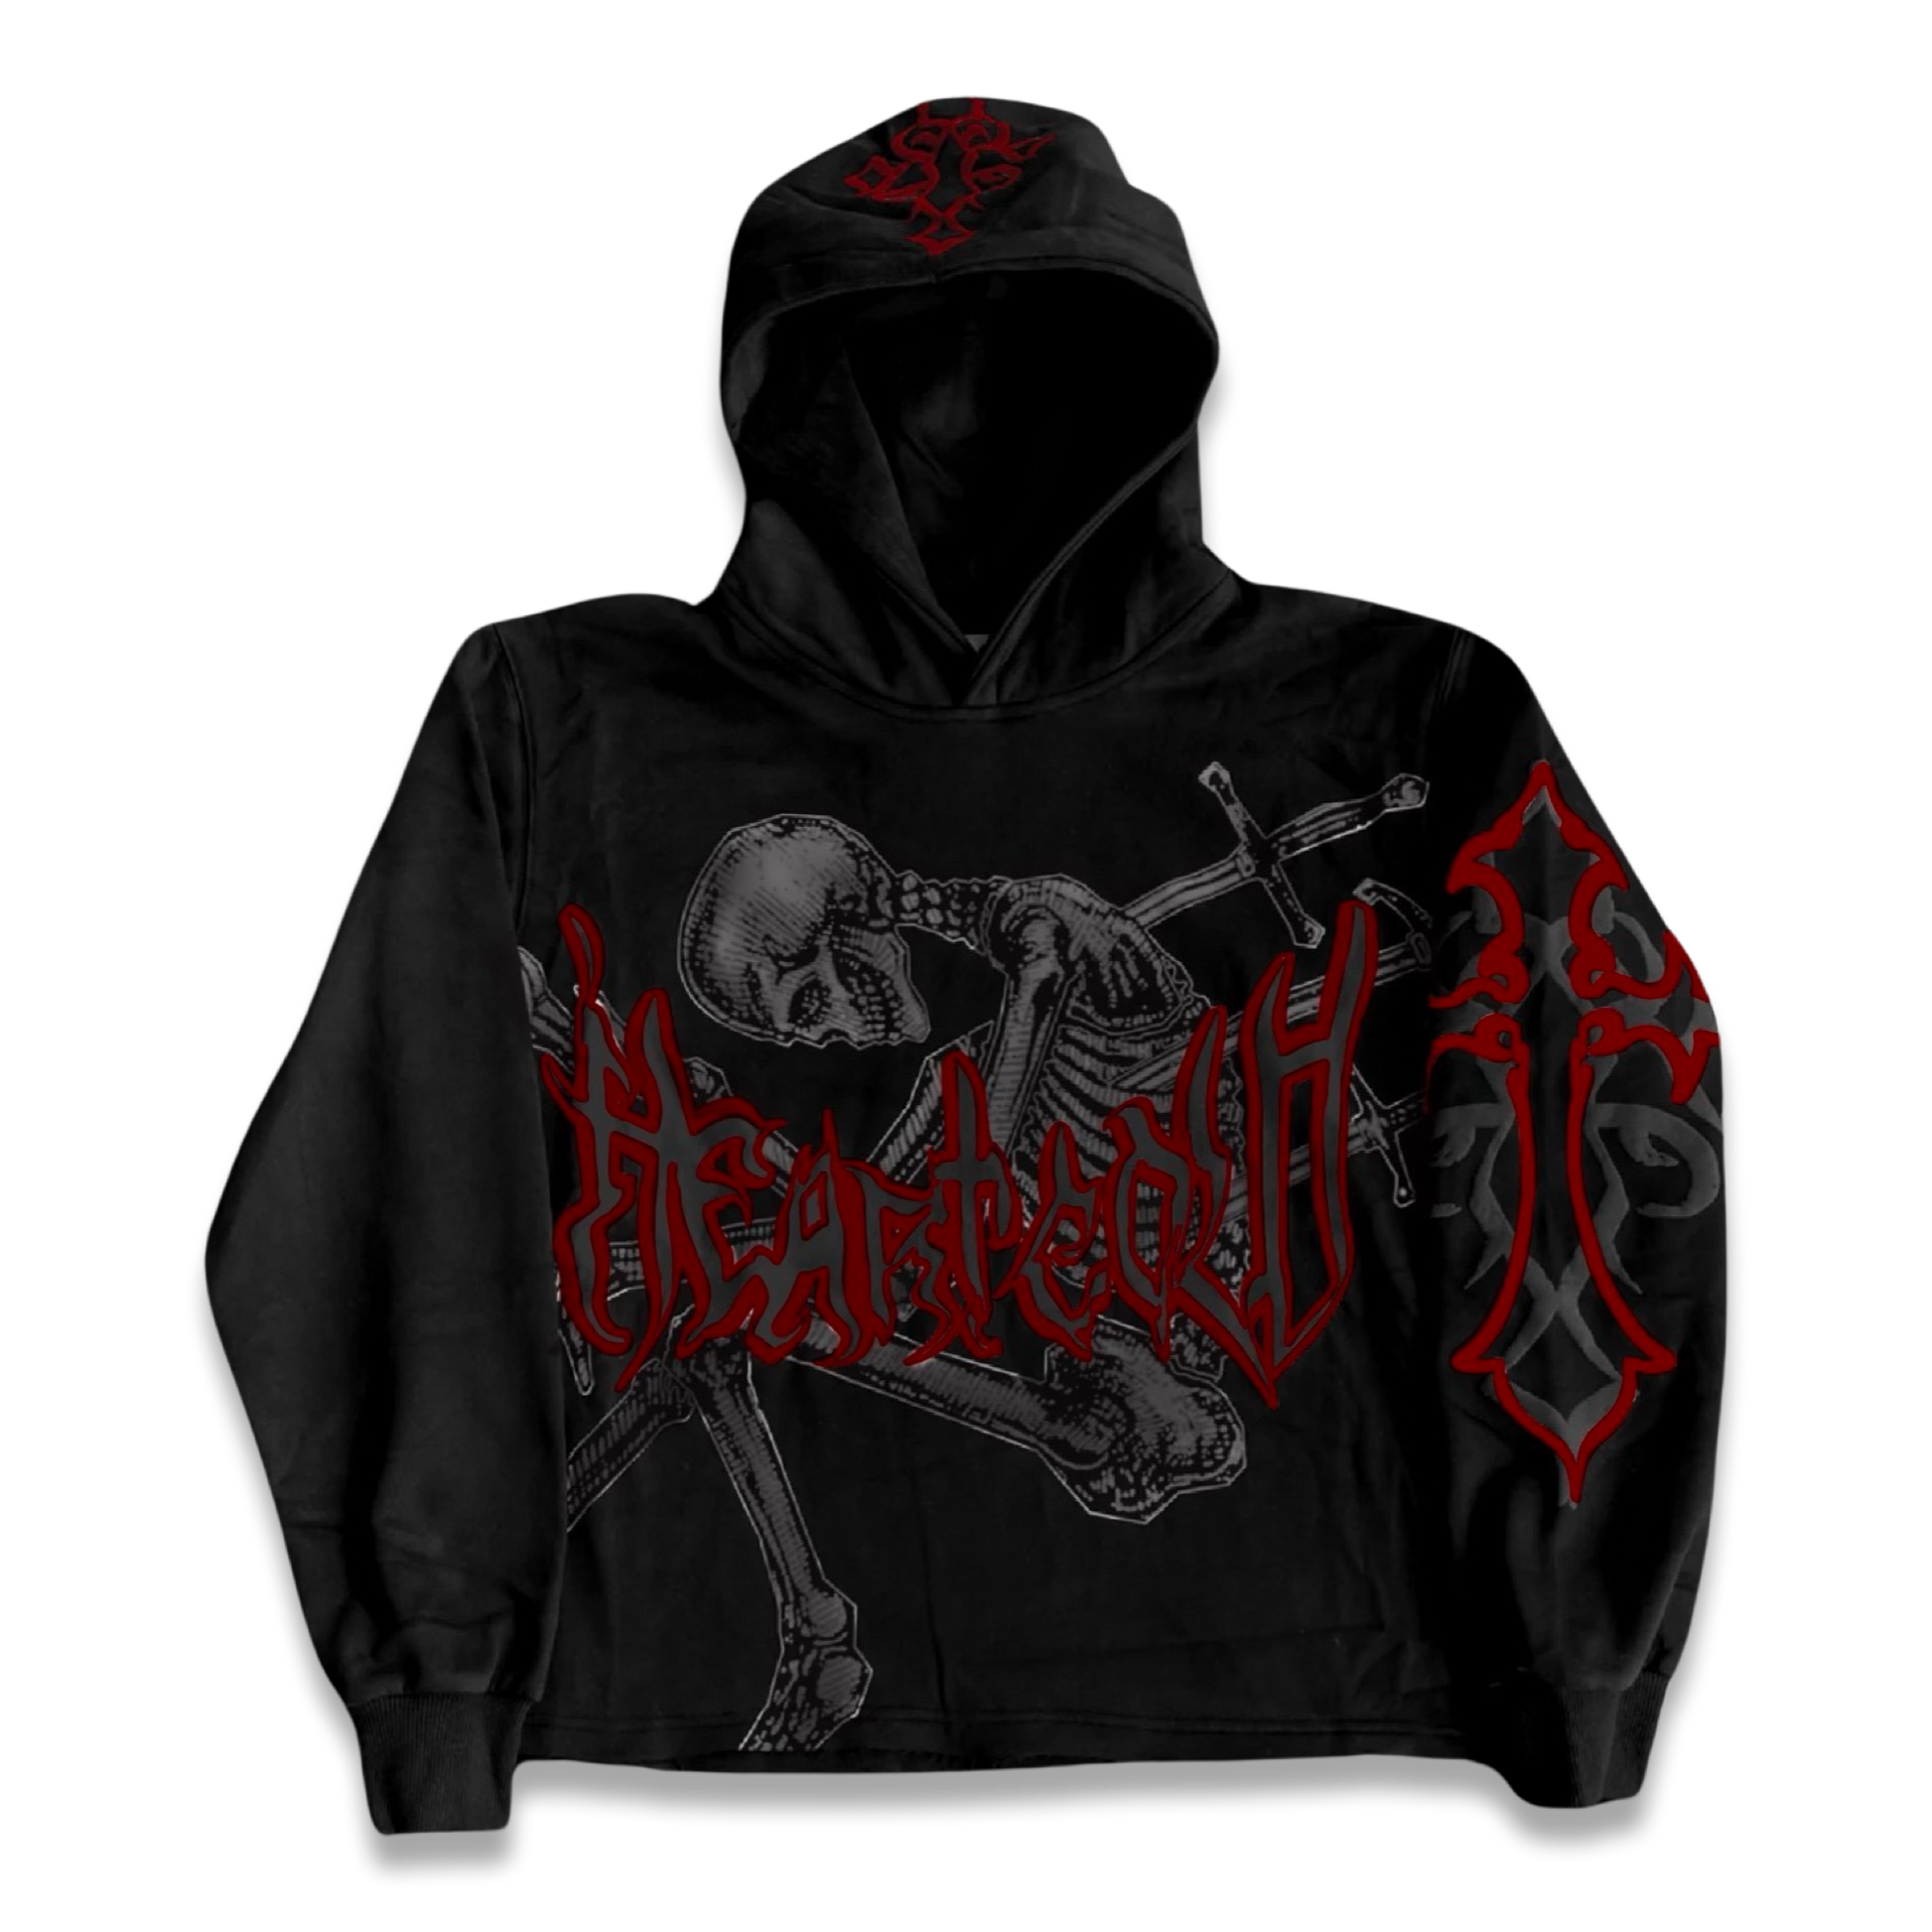 𝕾𝖐𝖚𝖑𝖑 𝖈𝖗𝖚𝖘𝖍𝖊𝖗 Hoodie Black and Red – Heartcold